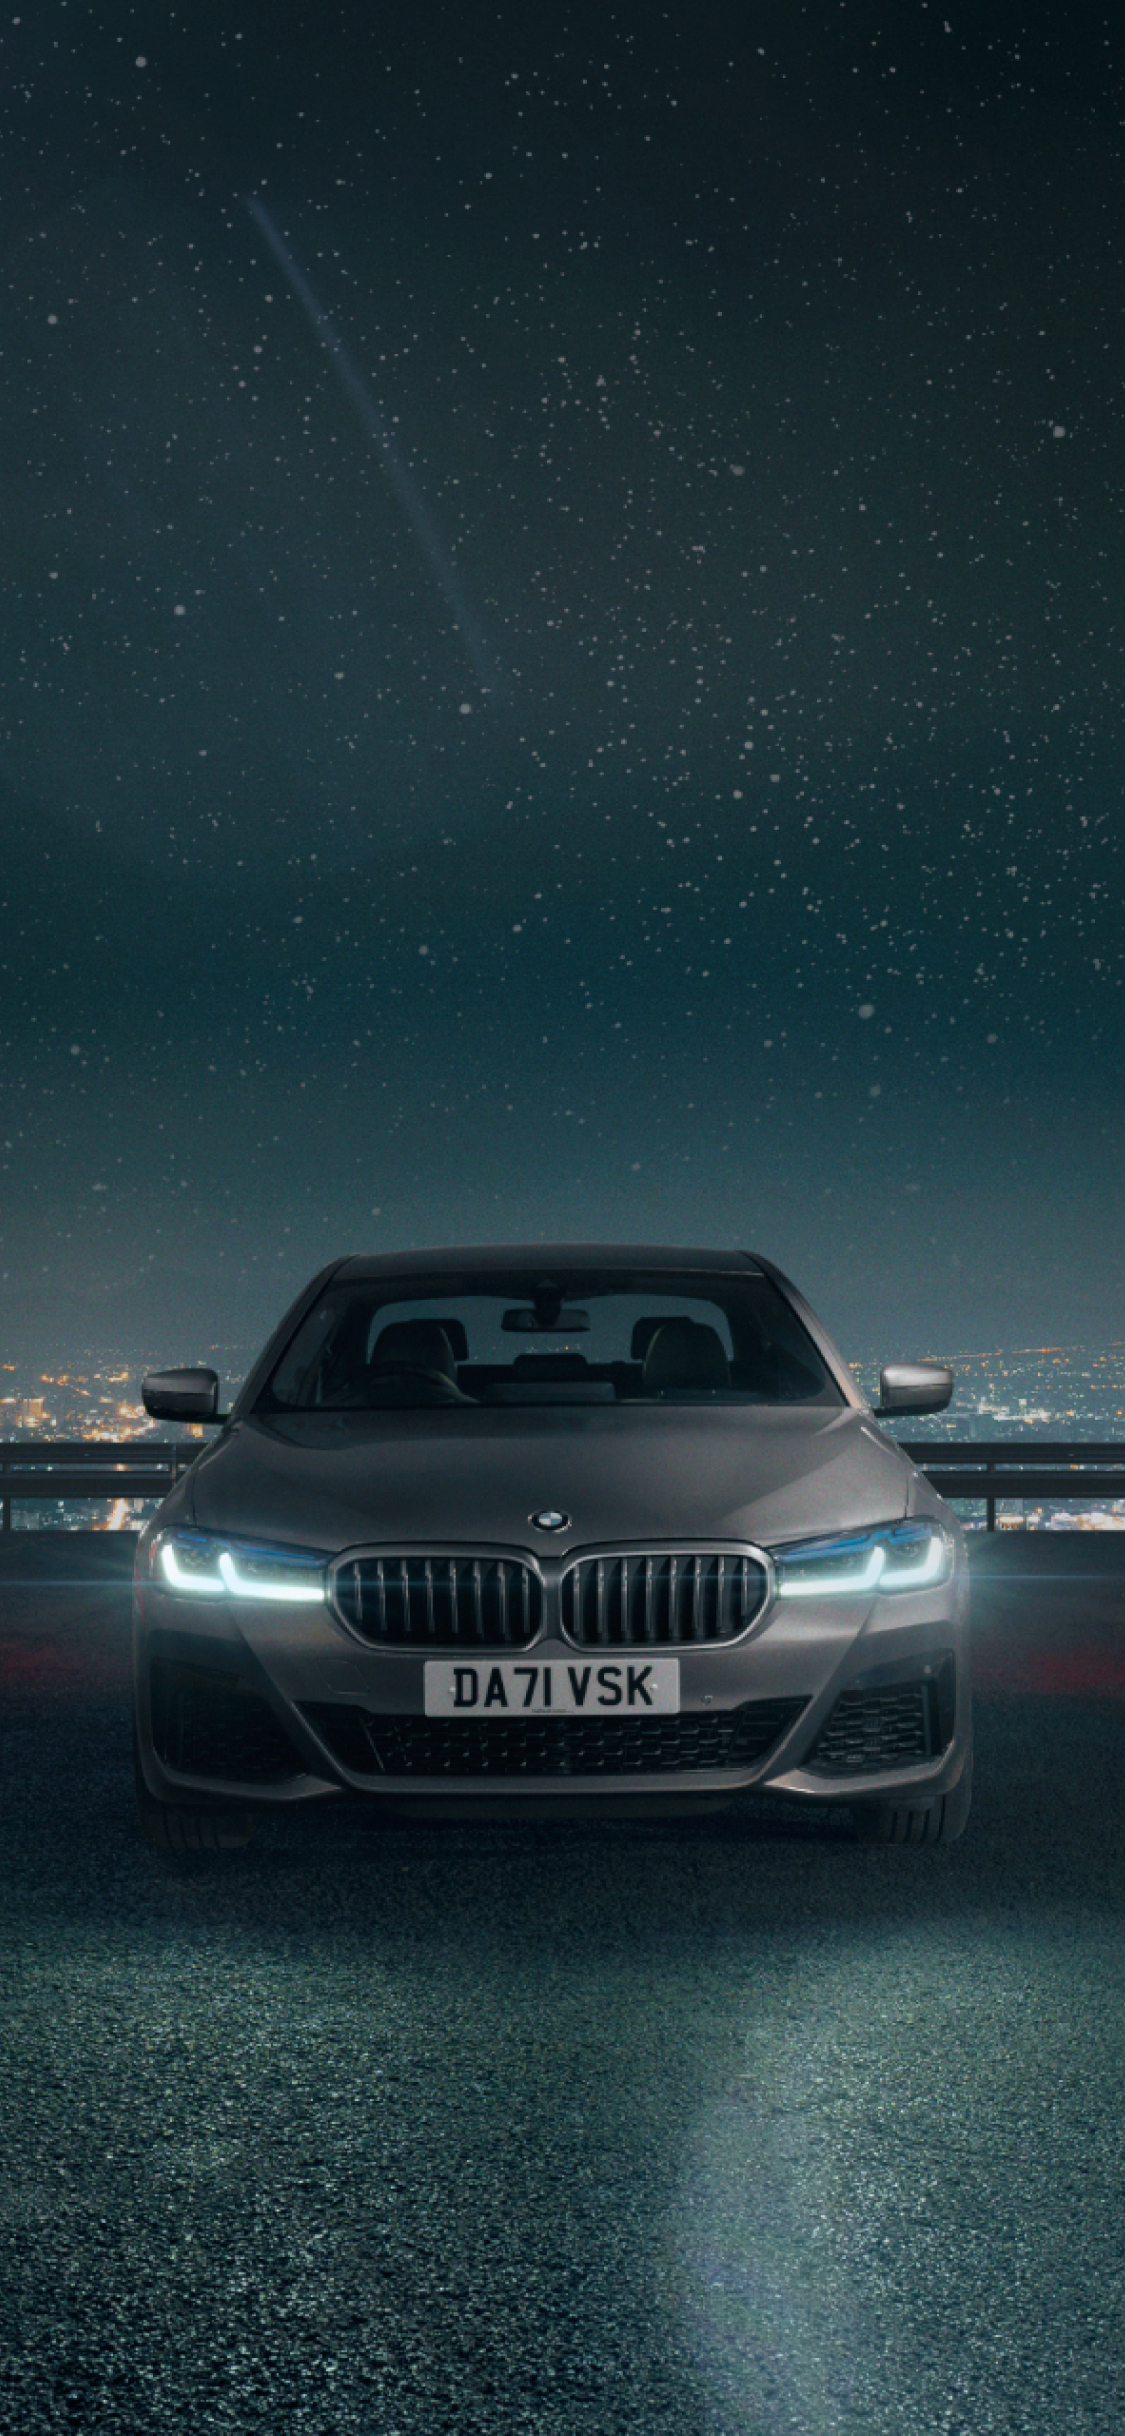 BMW Retro IPhone Wallpaper HD  IPhone Wallpapers  iPhone Wallpapers